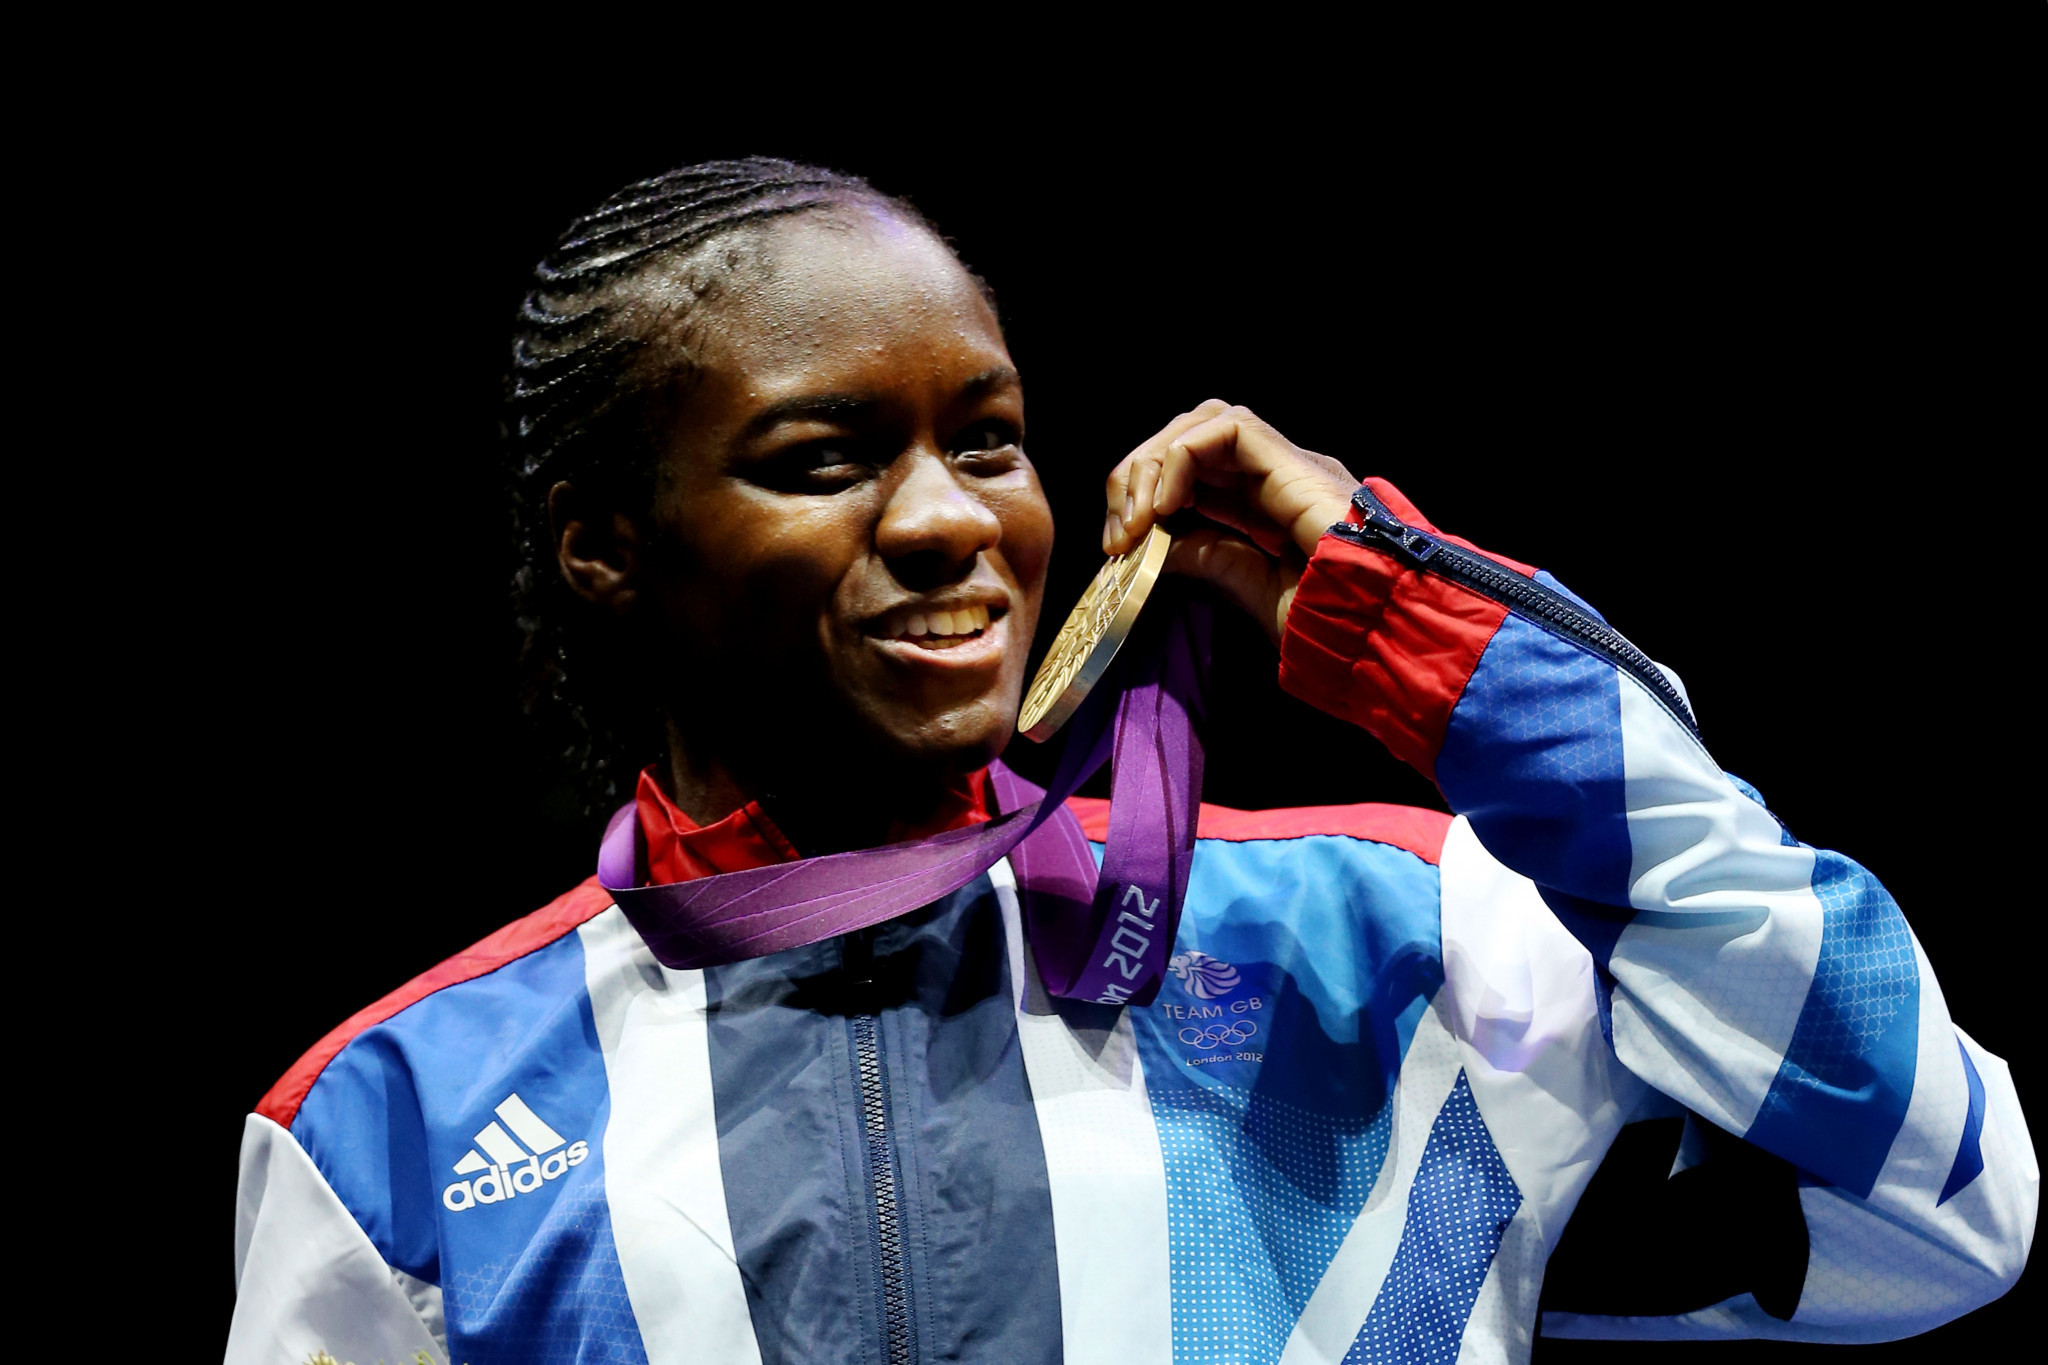 Nicola Adams was the first woman to win an Olympic gold medal in boxing when she triumphed in the flyweight category at London 2012 ©Getty Images